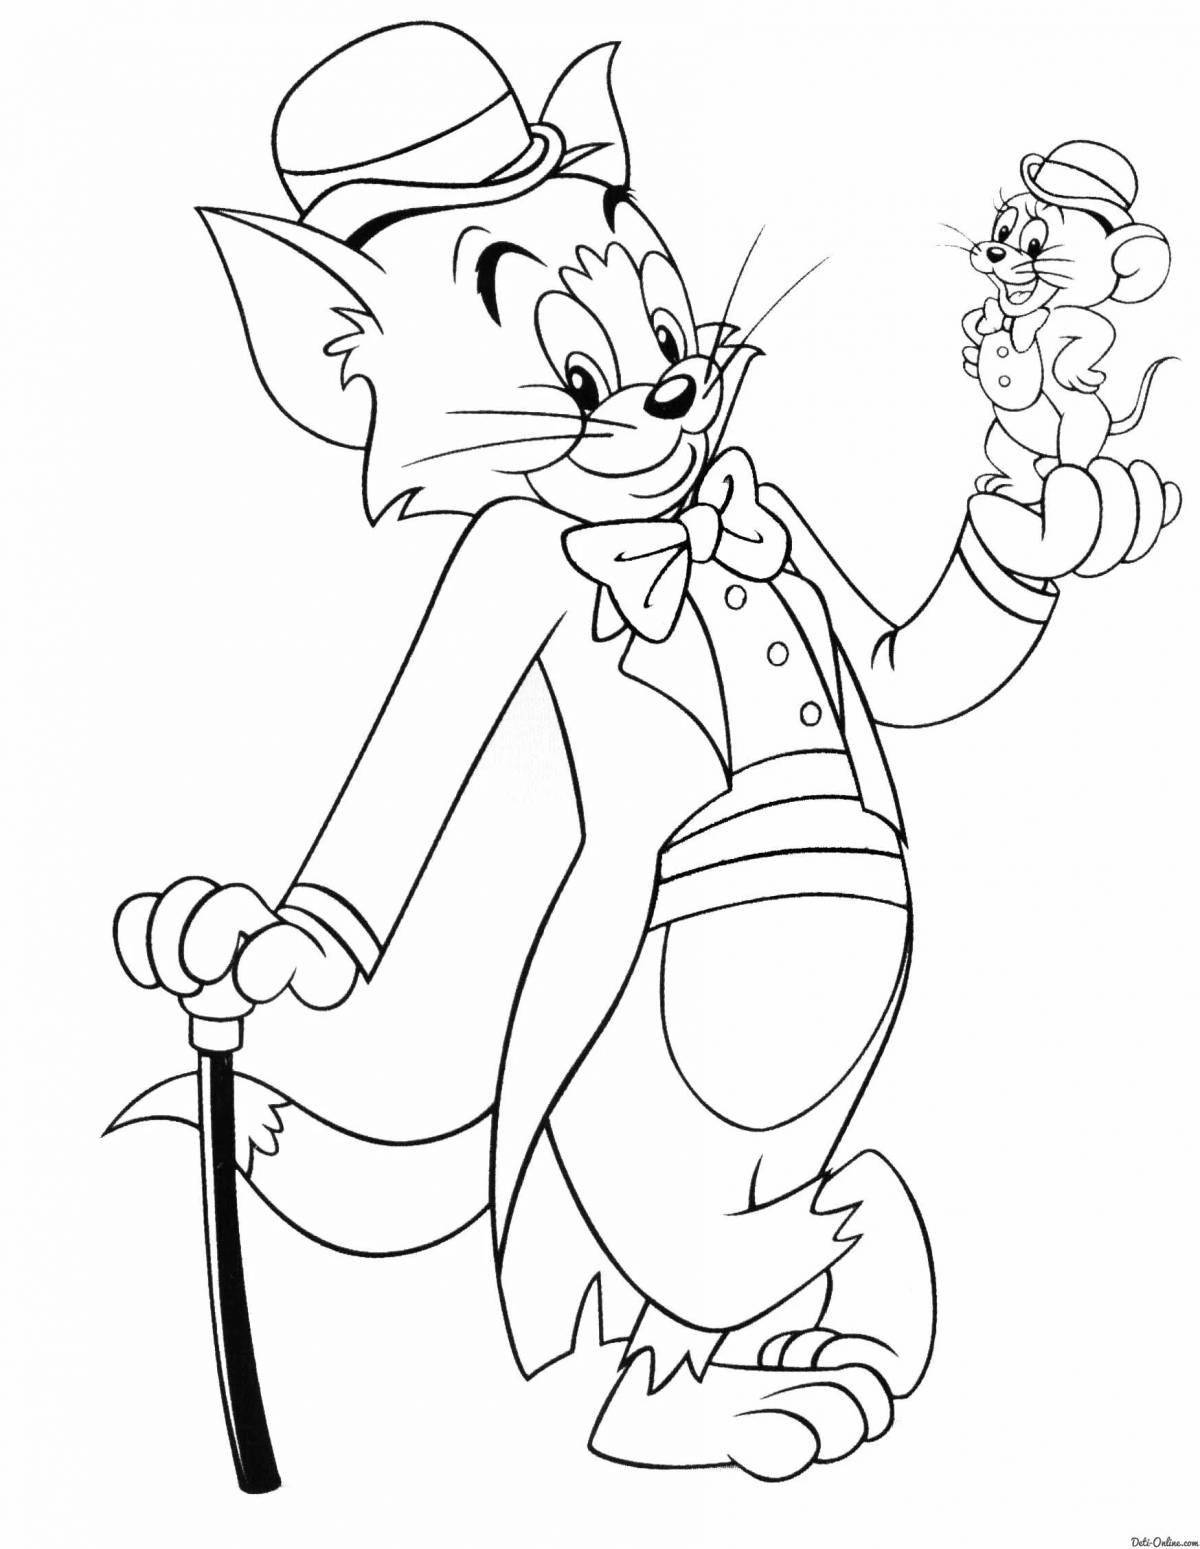 Attractive tom and jerry coloring book